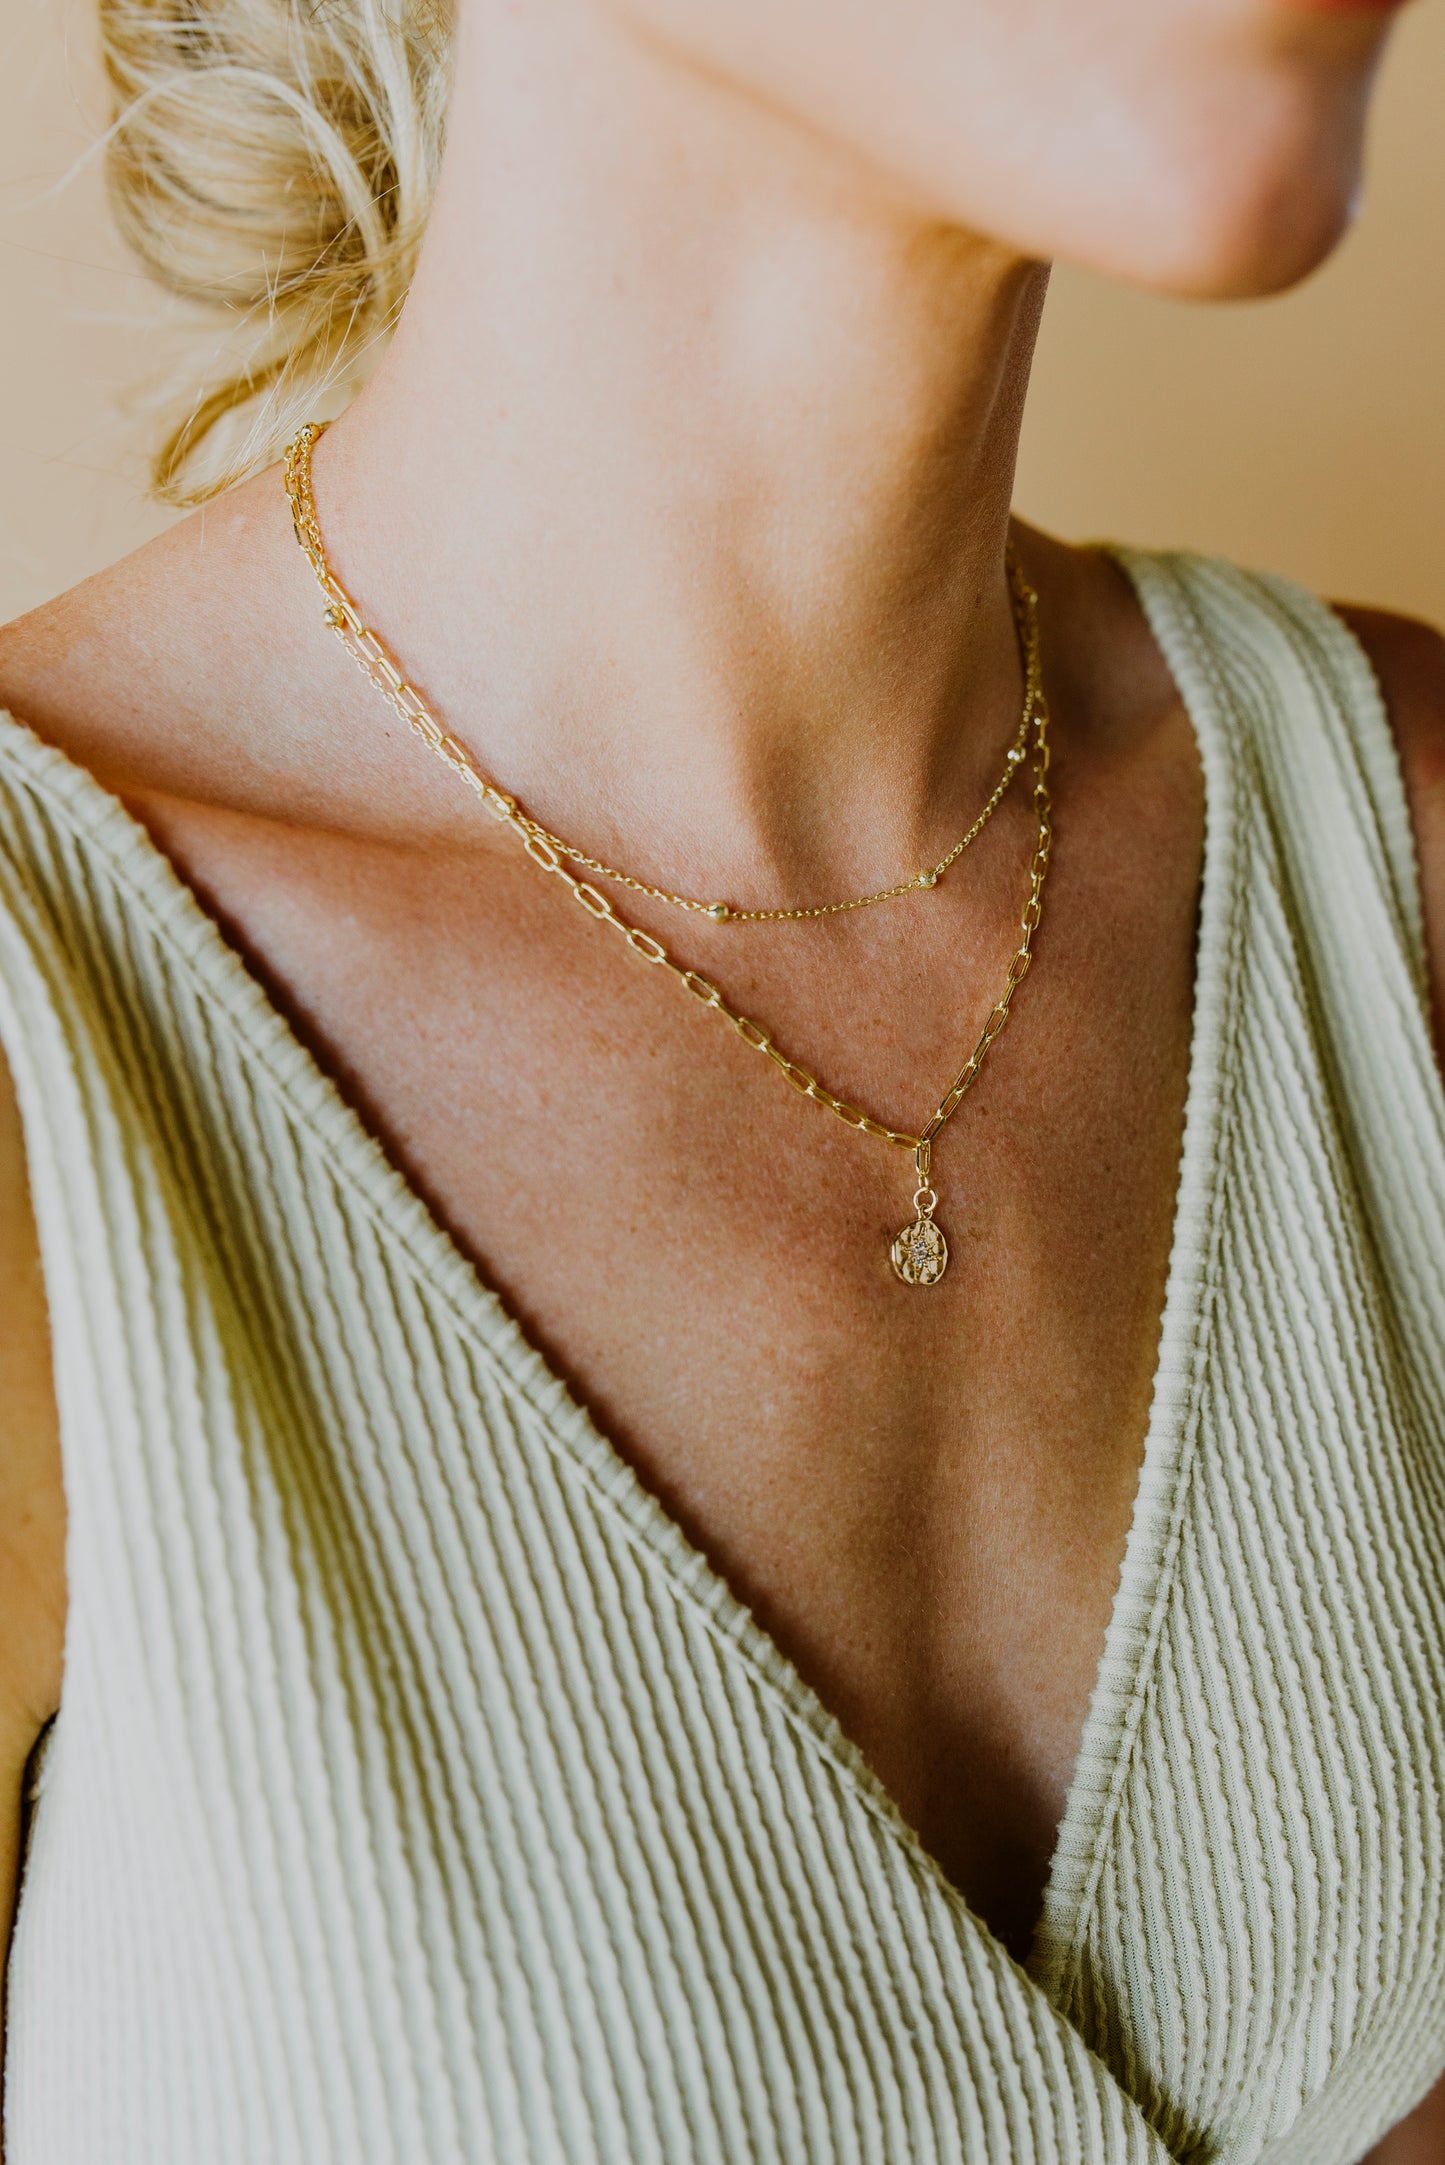 Dainty Bead and Chain Gold Filled Necklace by Layerhandmade